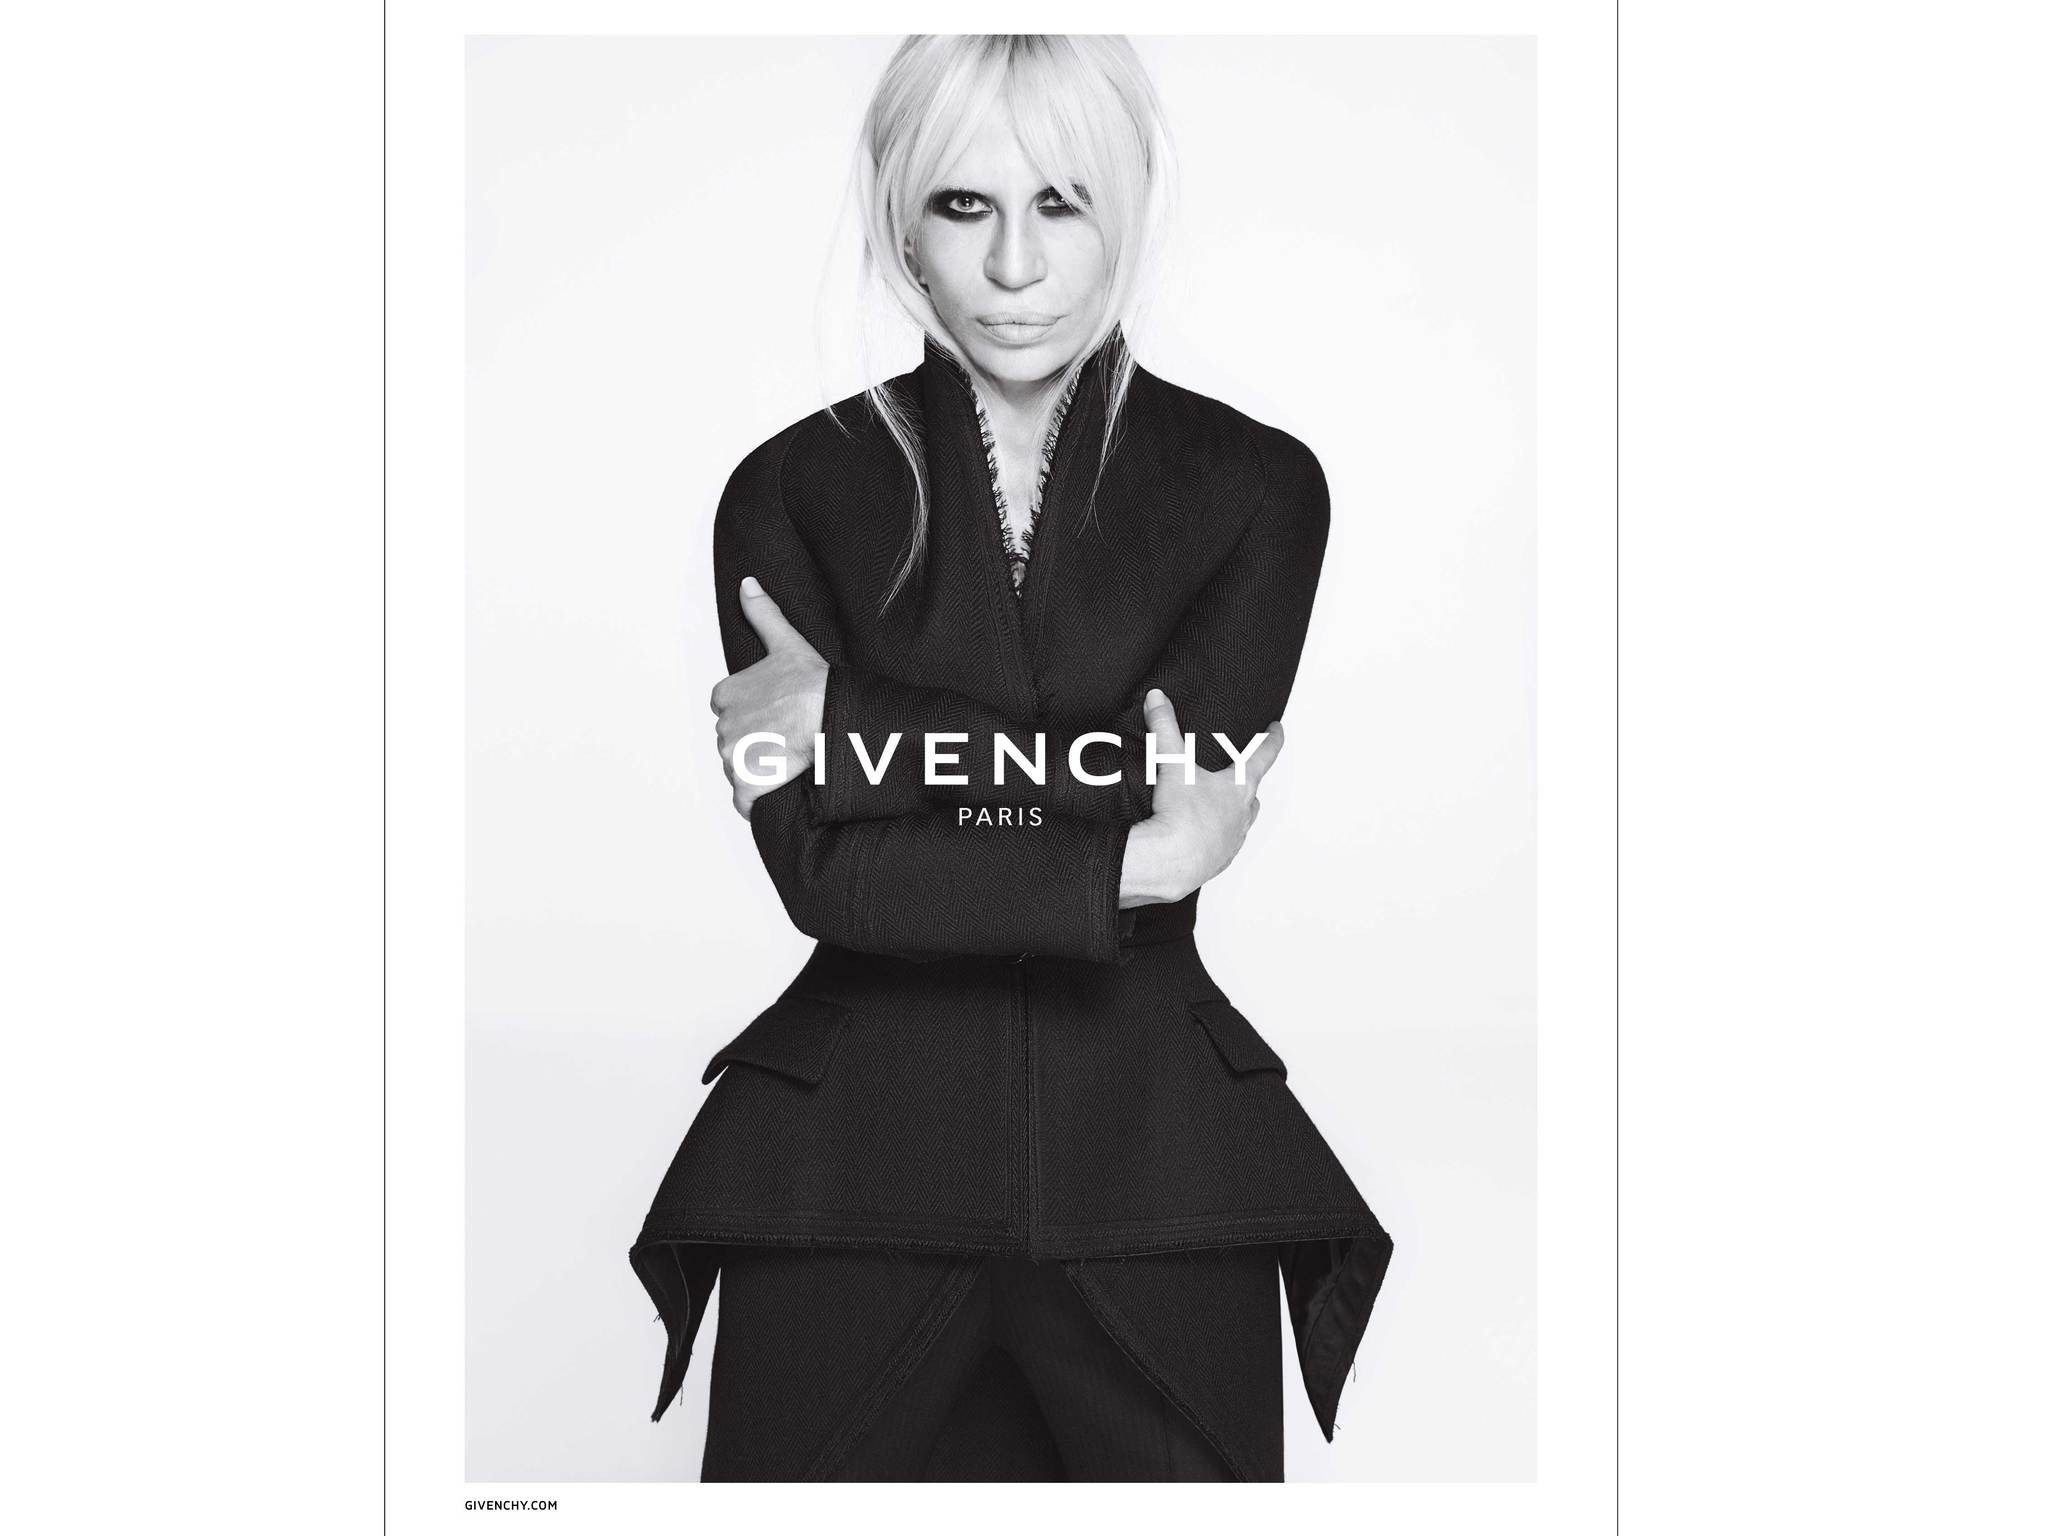 Givenchy campaign ad revealed starring rival designer Donatella Versace The Independent The Independent image